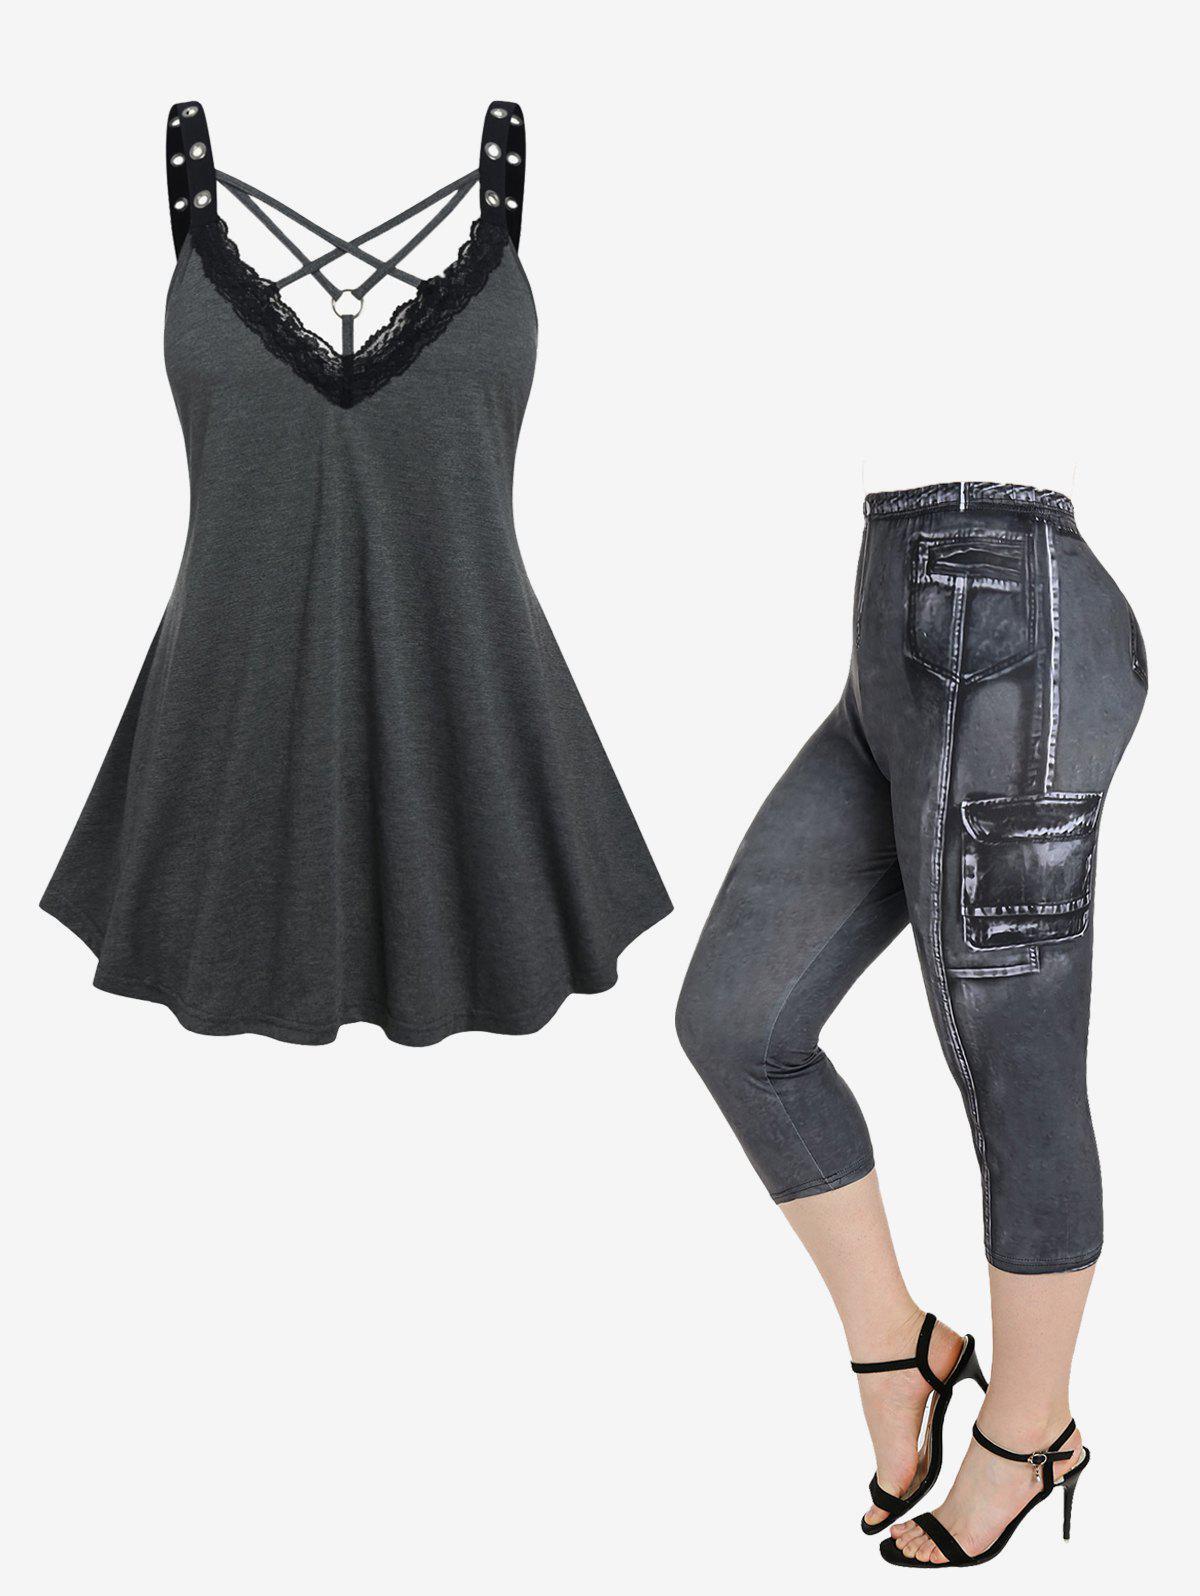 Lace Trim Grommet Gothic Tunic Top and 3D Jeans Printed Leggings Plus Size Summer Outfit